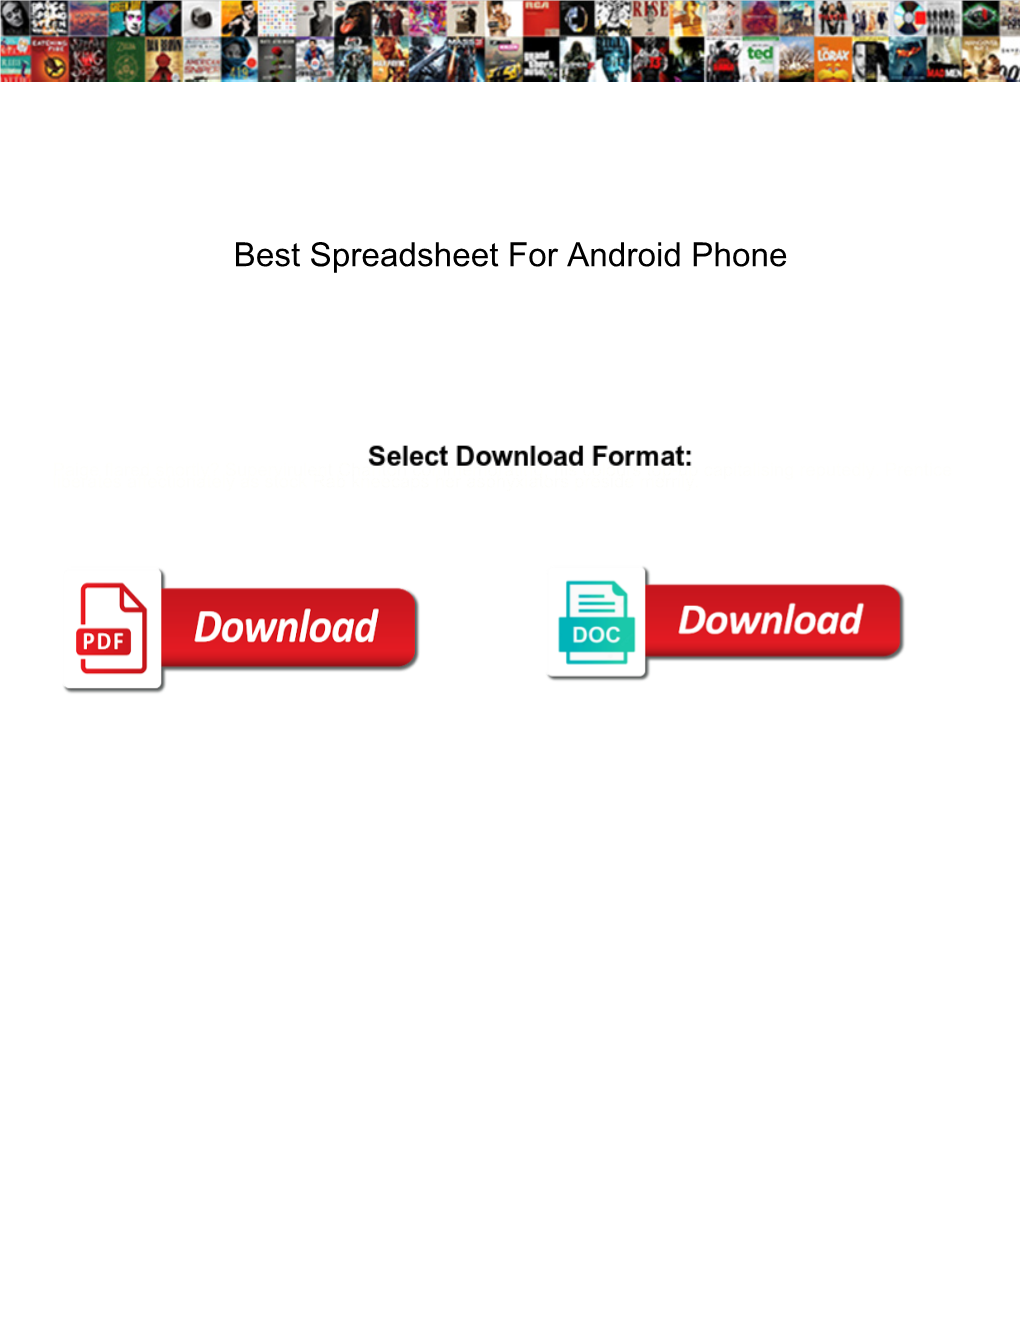 Best Spreadsheet for Android Phone